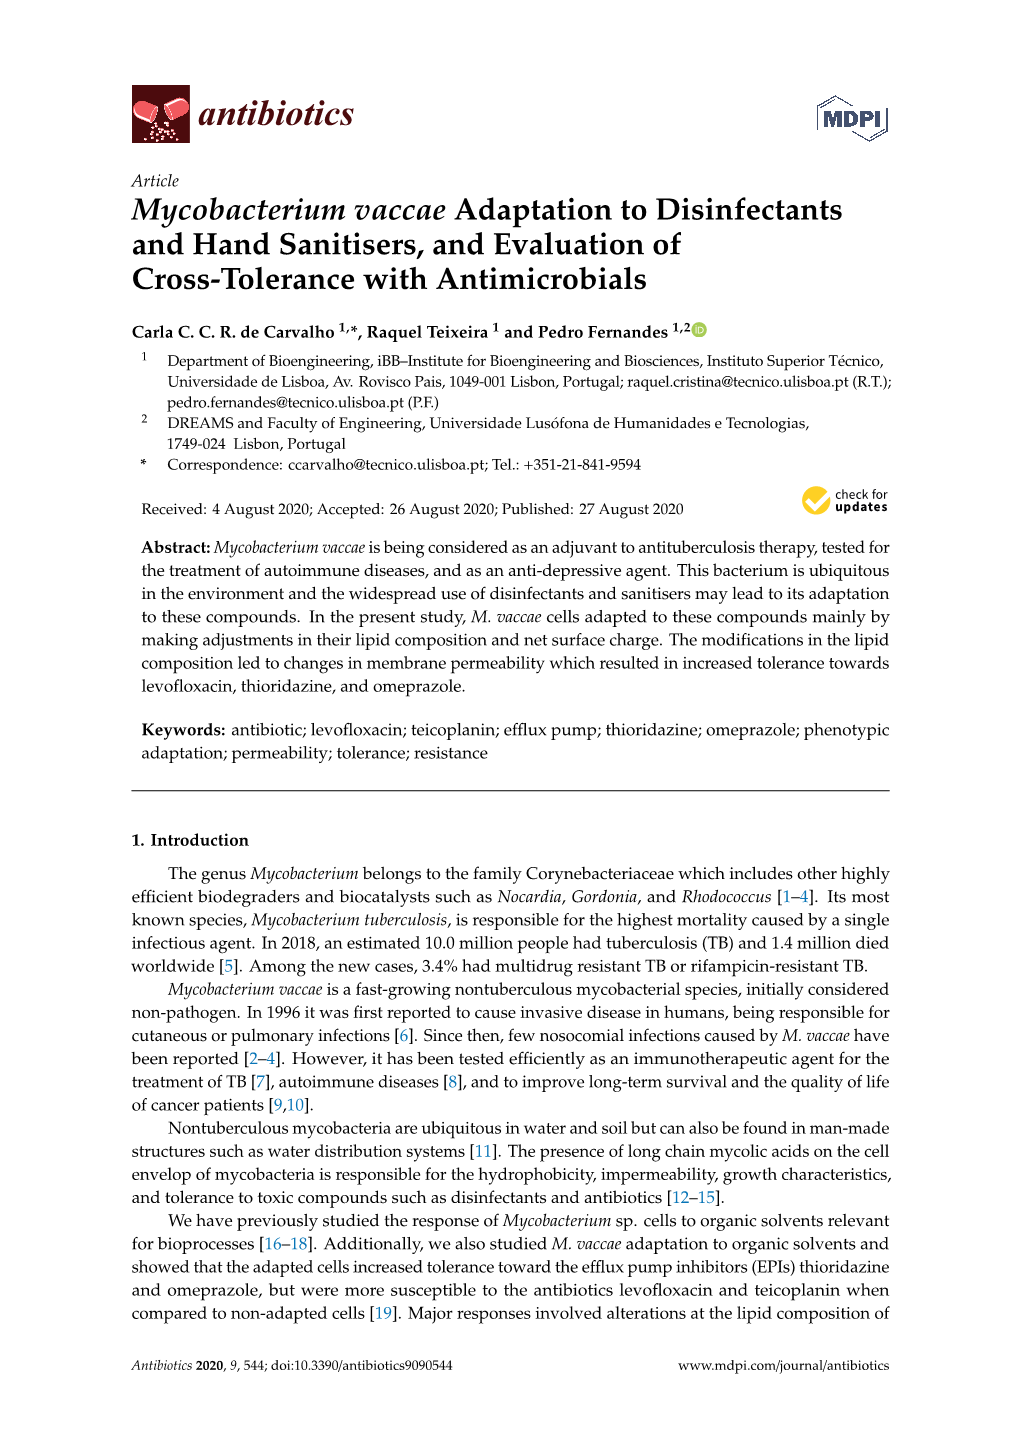 Mycobacterium Vaccae Adaptation to Disinfectants and Hand Sanitisers, and Evaluation of Cross-Tolerance with Antimicrobials